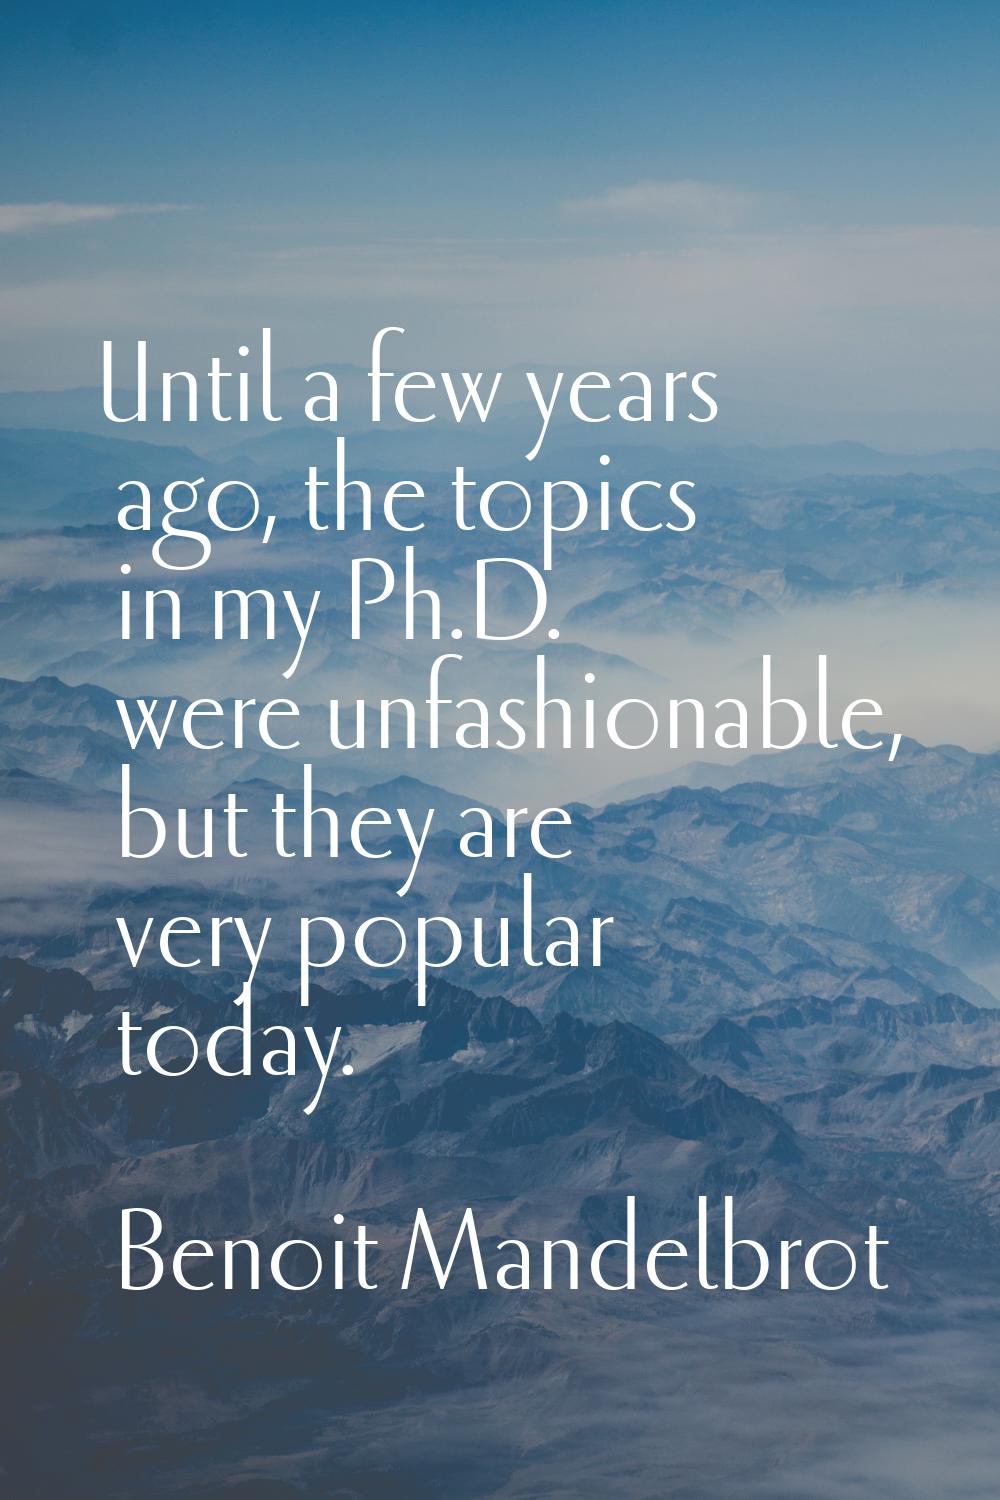 Until a few years ago, the topics in my Ph.D. were unfashionable, but they are very popular today.